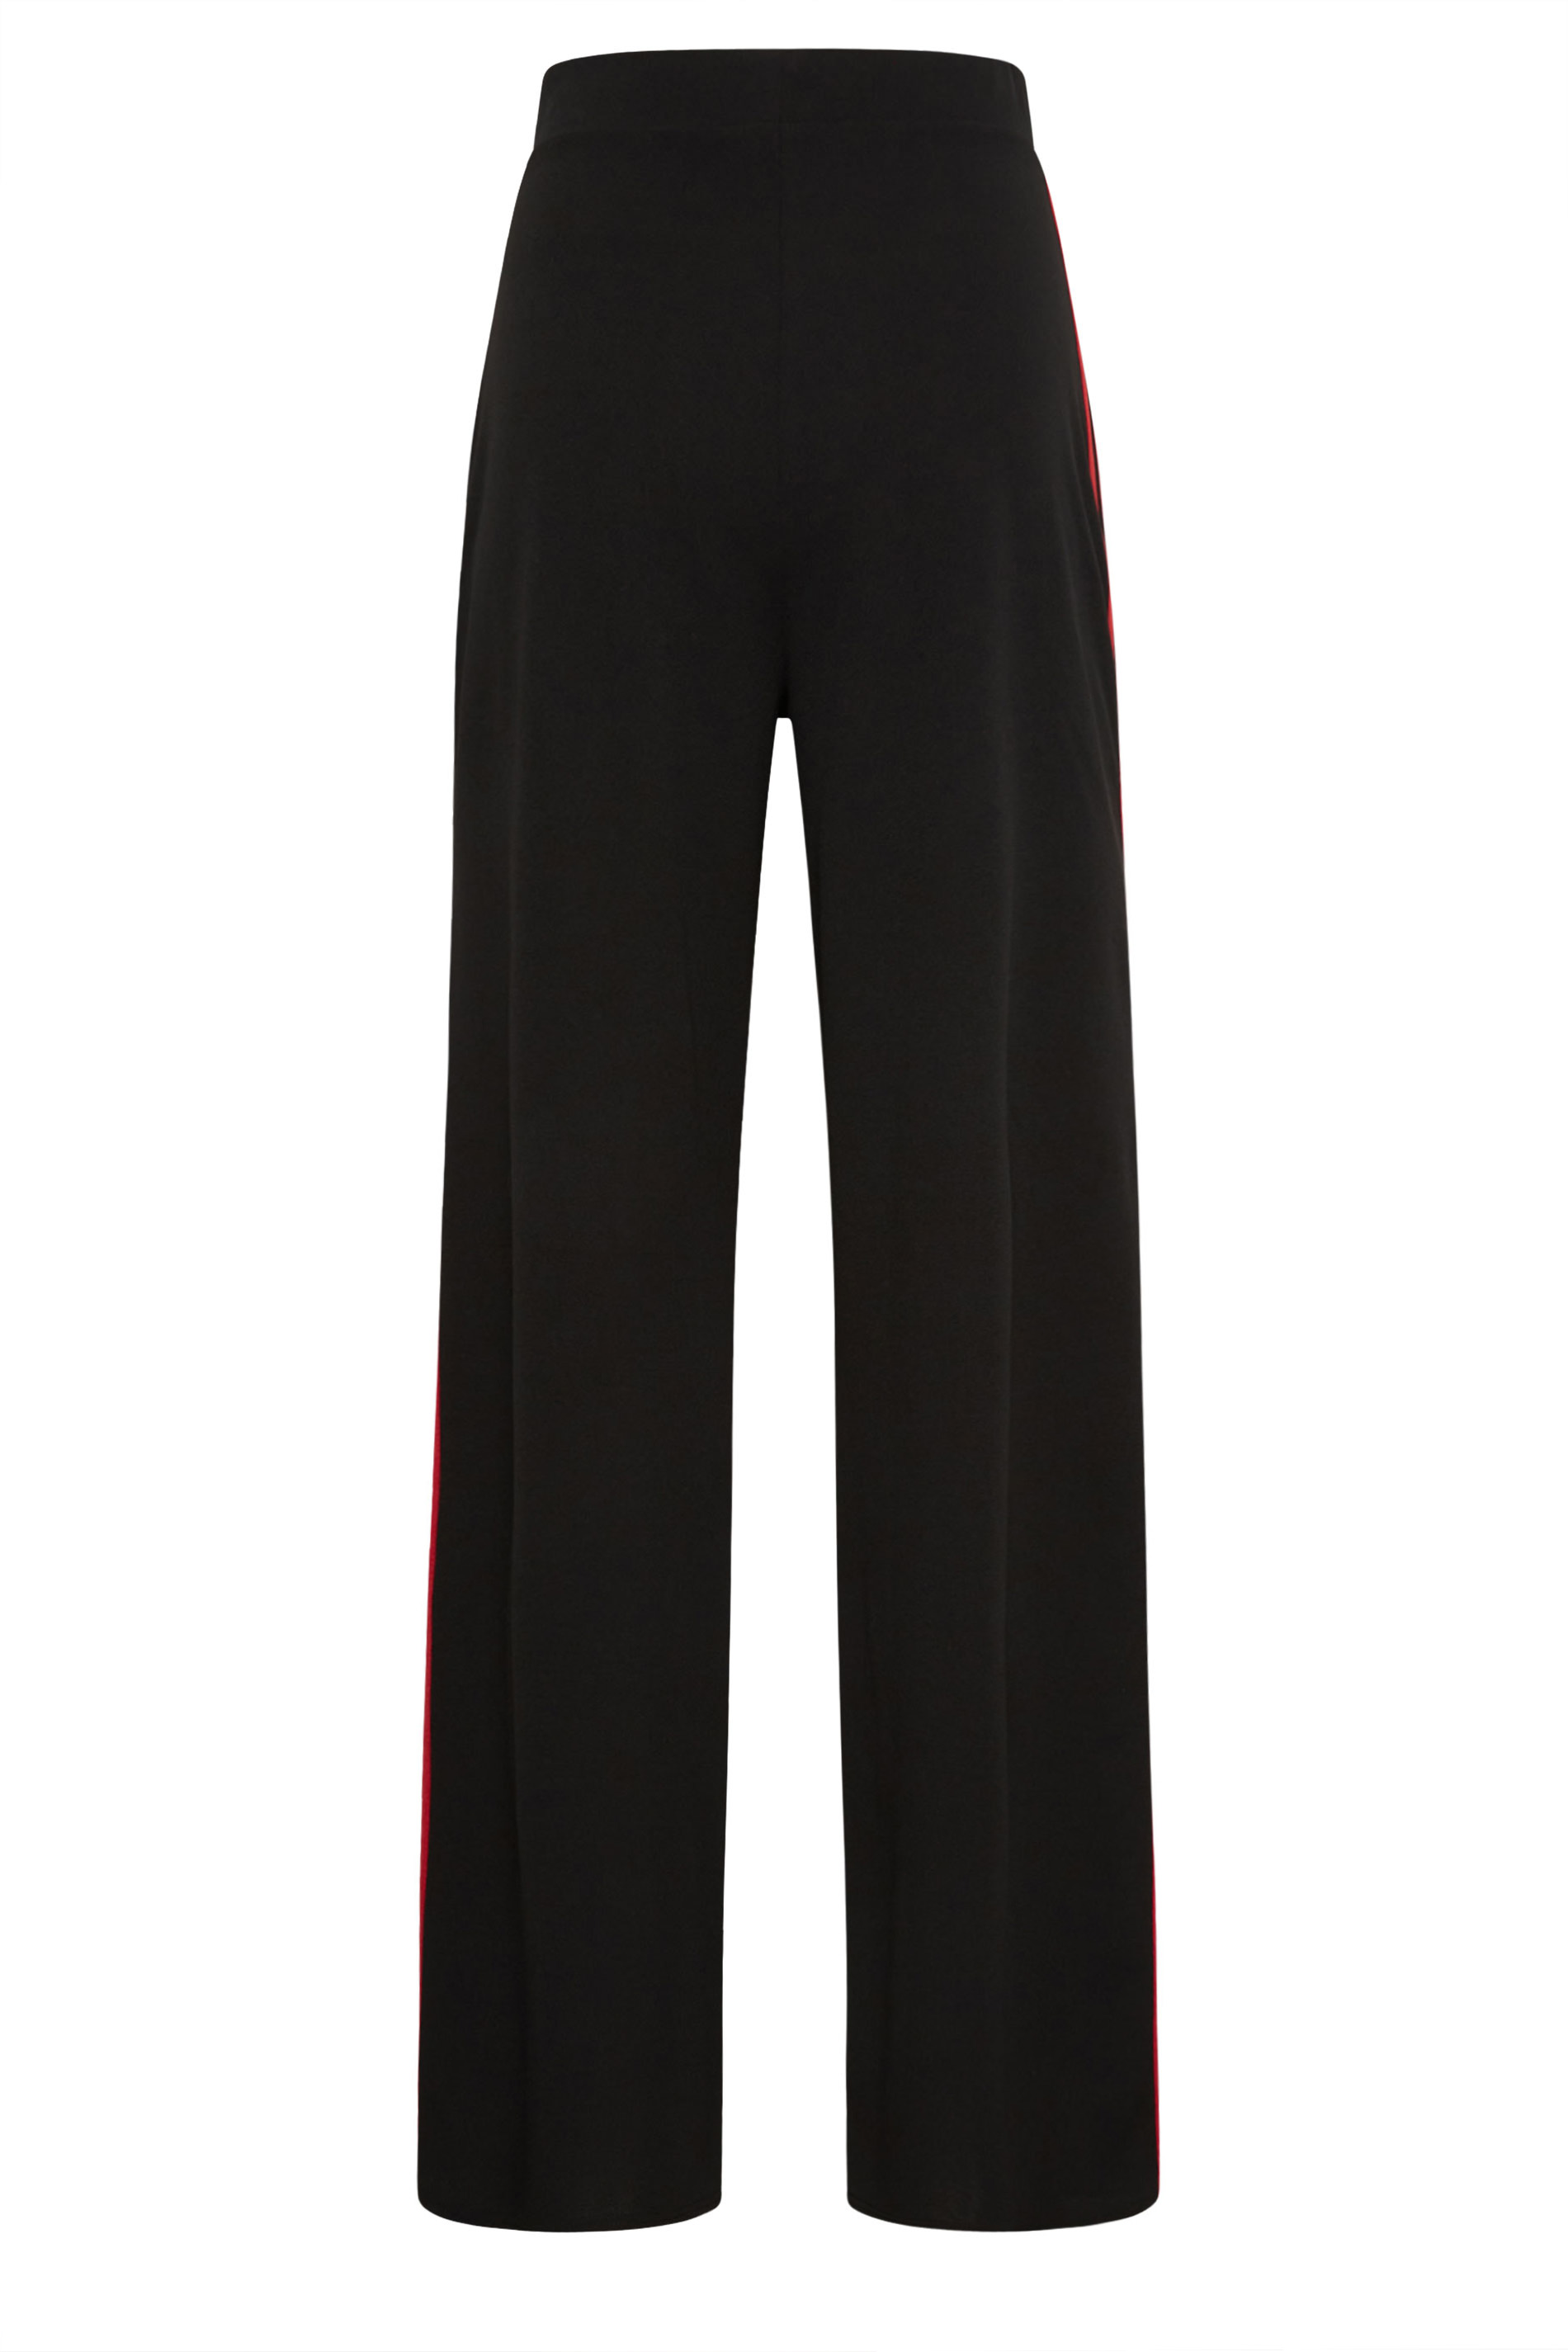 Trousers with side stripes - Dark blue/Red - Ladies | H&M IN